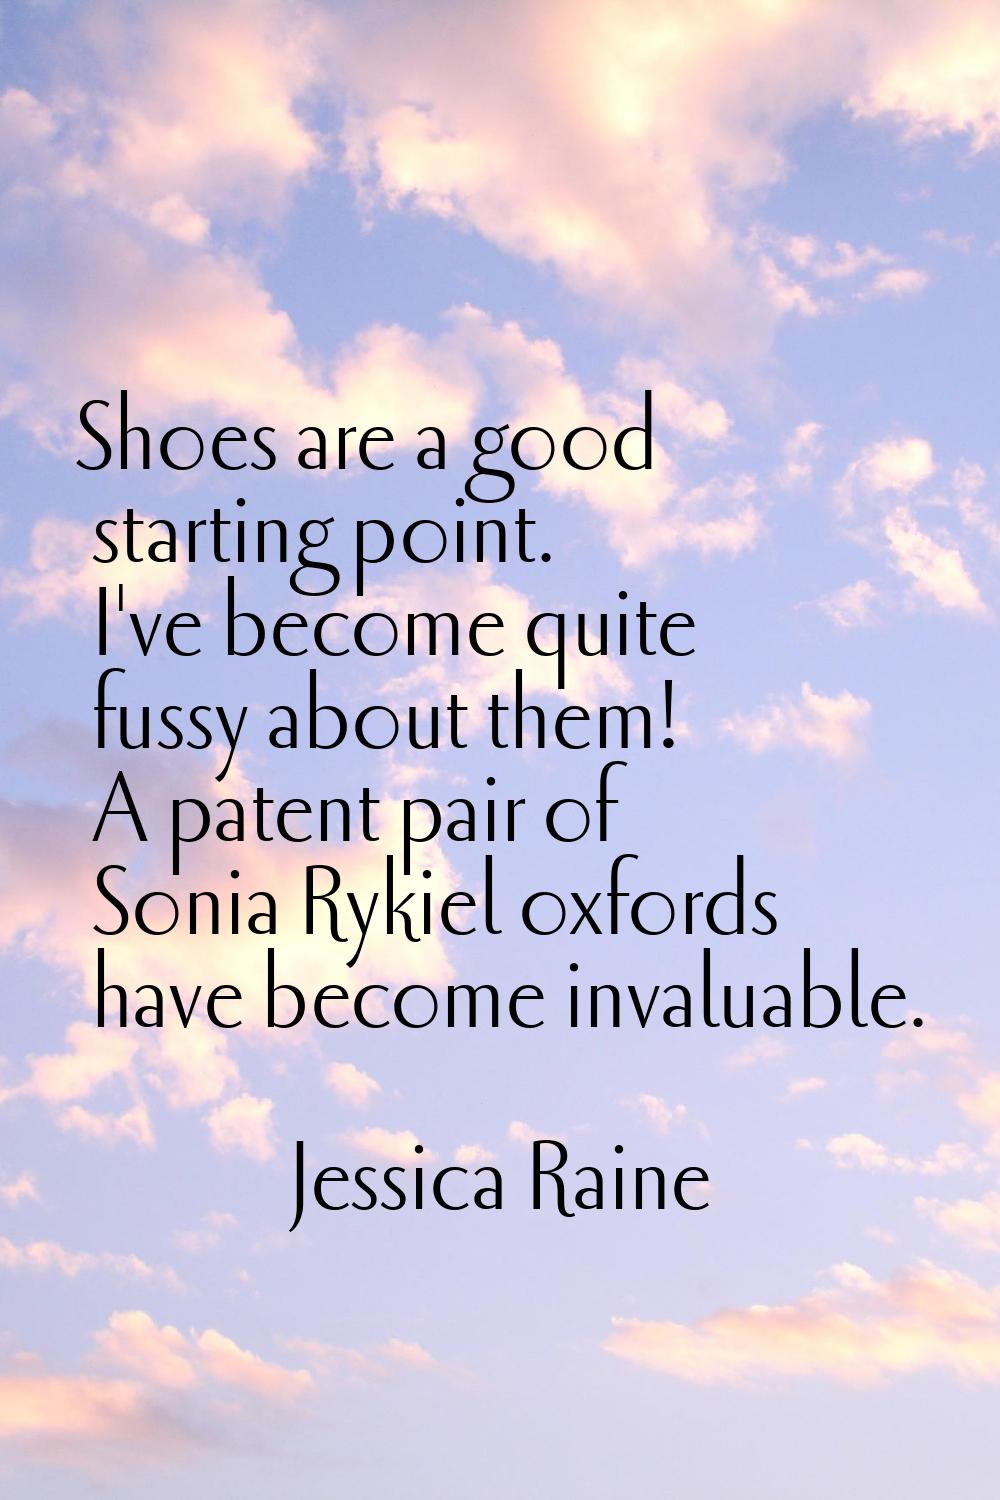 Shoes are a good starting point. I've become quite fussy about them! A patent pair of Sonia Rykiel 